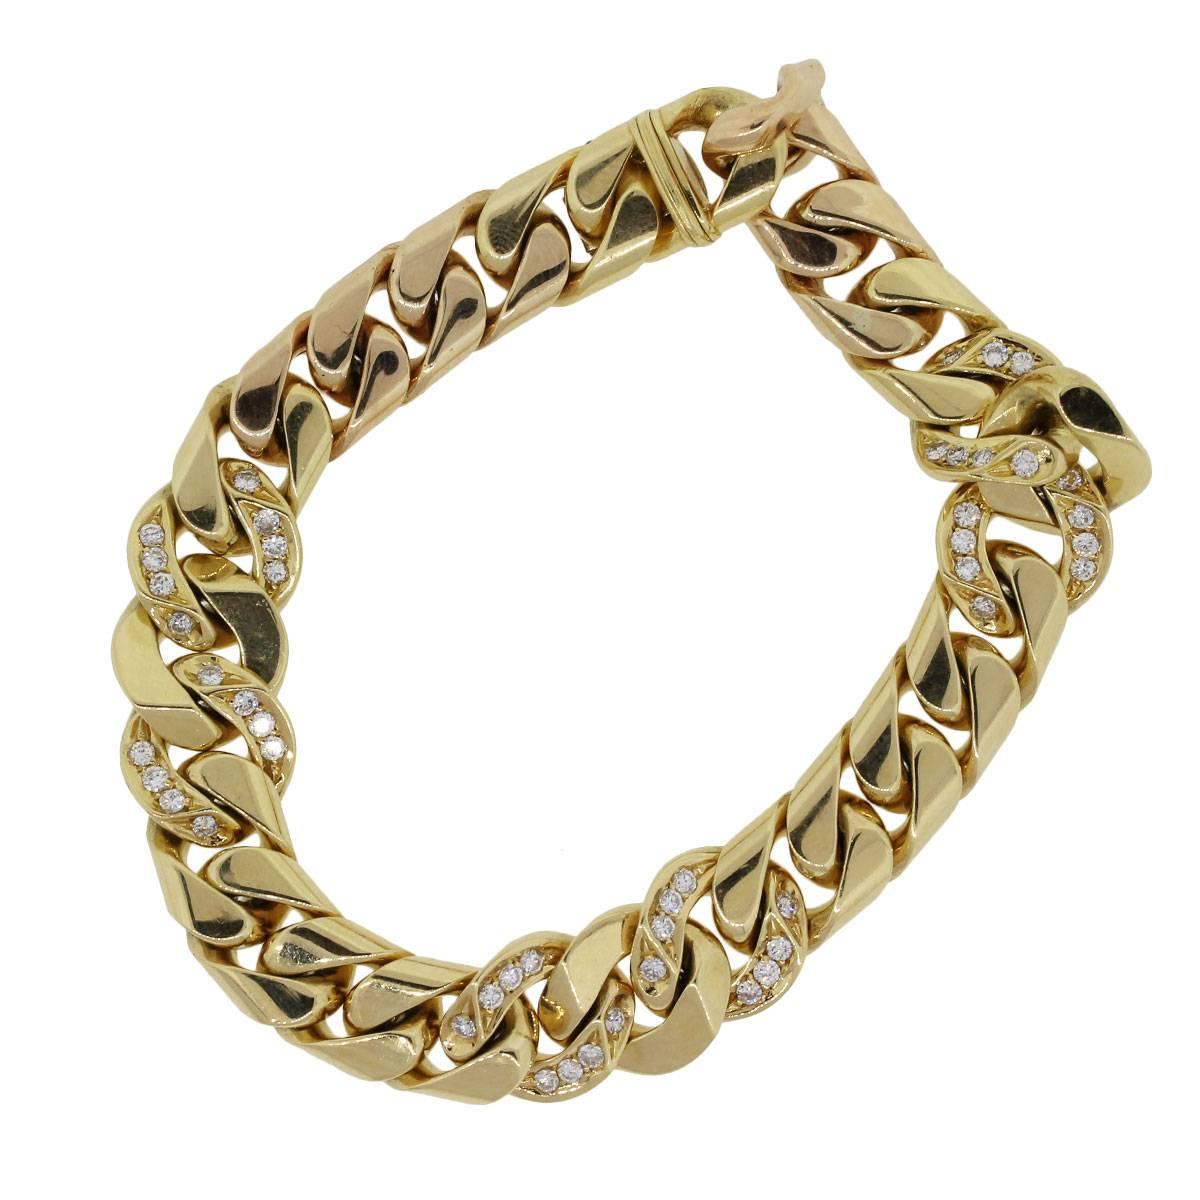 Style: Bulgari 18k Yellow Gold  2ctw Diamond Link Gents Bracelet
Material: 18k Yellow Gold
Diamond Details: Approximately 2ctw of Round Brilliant Diamonds. Diamonds are G/H in color and VS in clarity
Total Weight: 96.6g (62.2dwt)
Measurements: 8.50